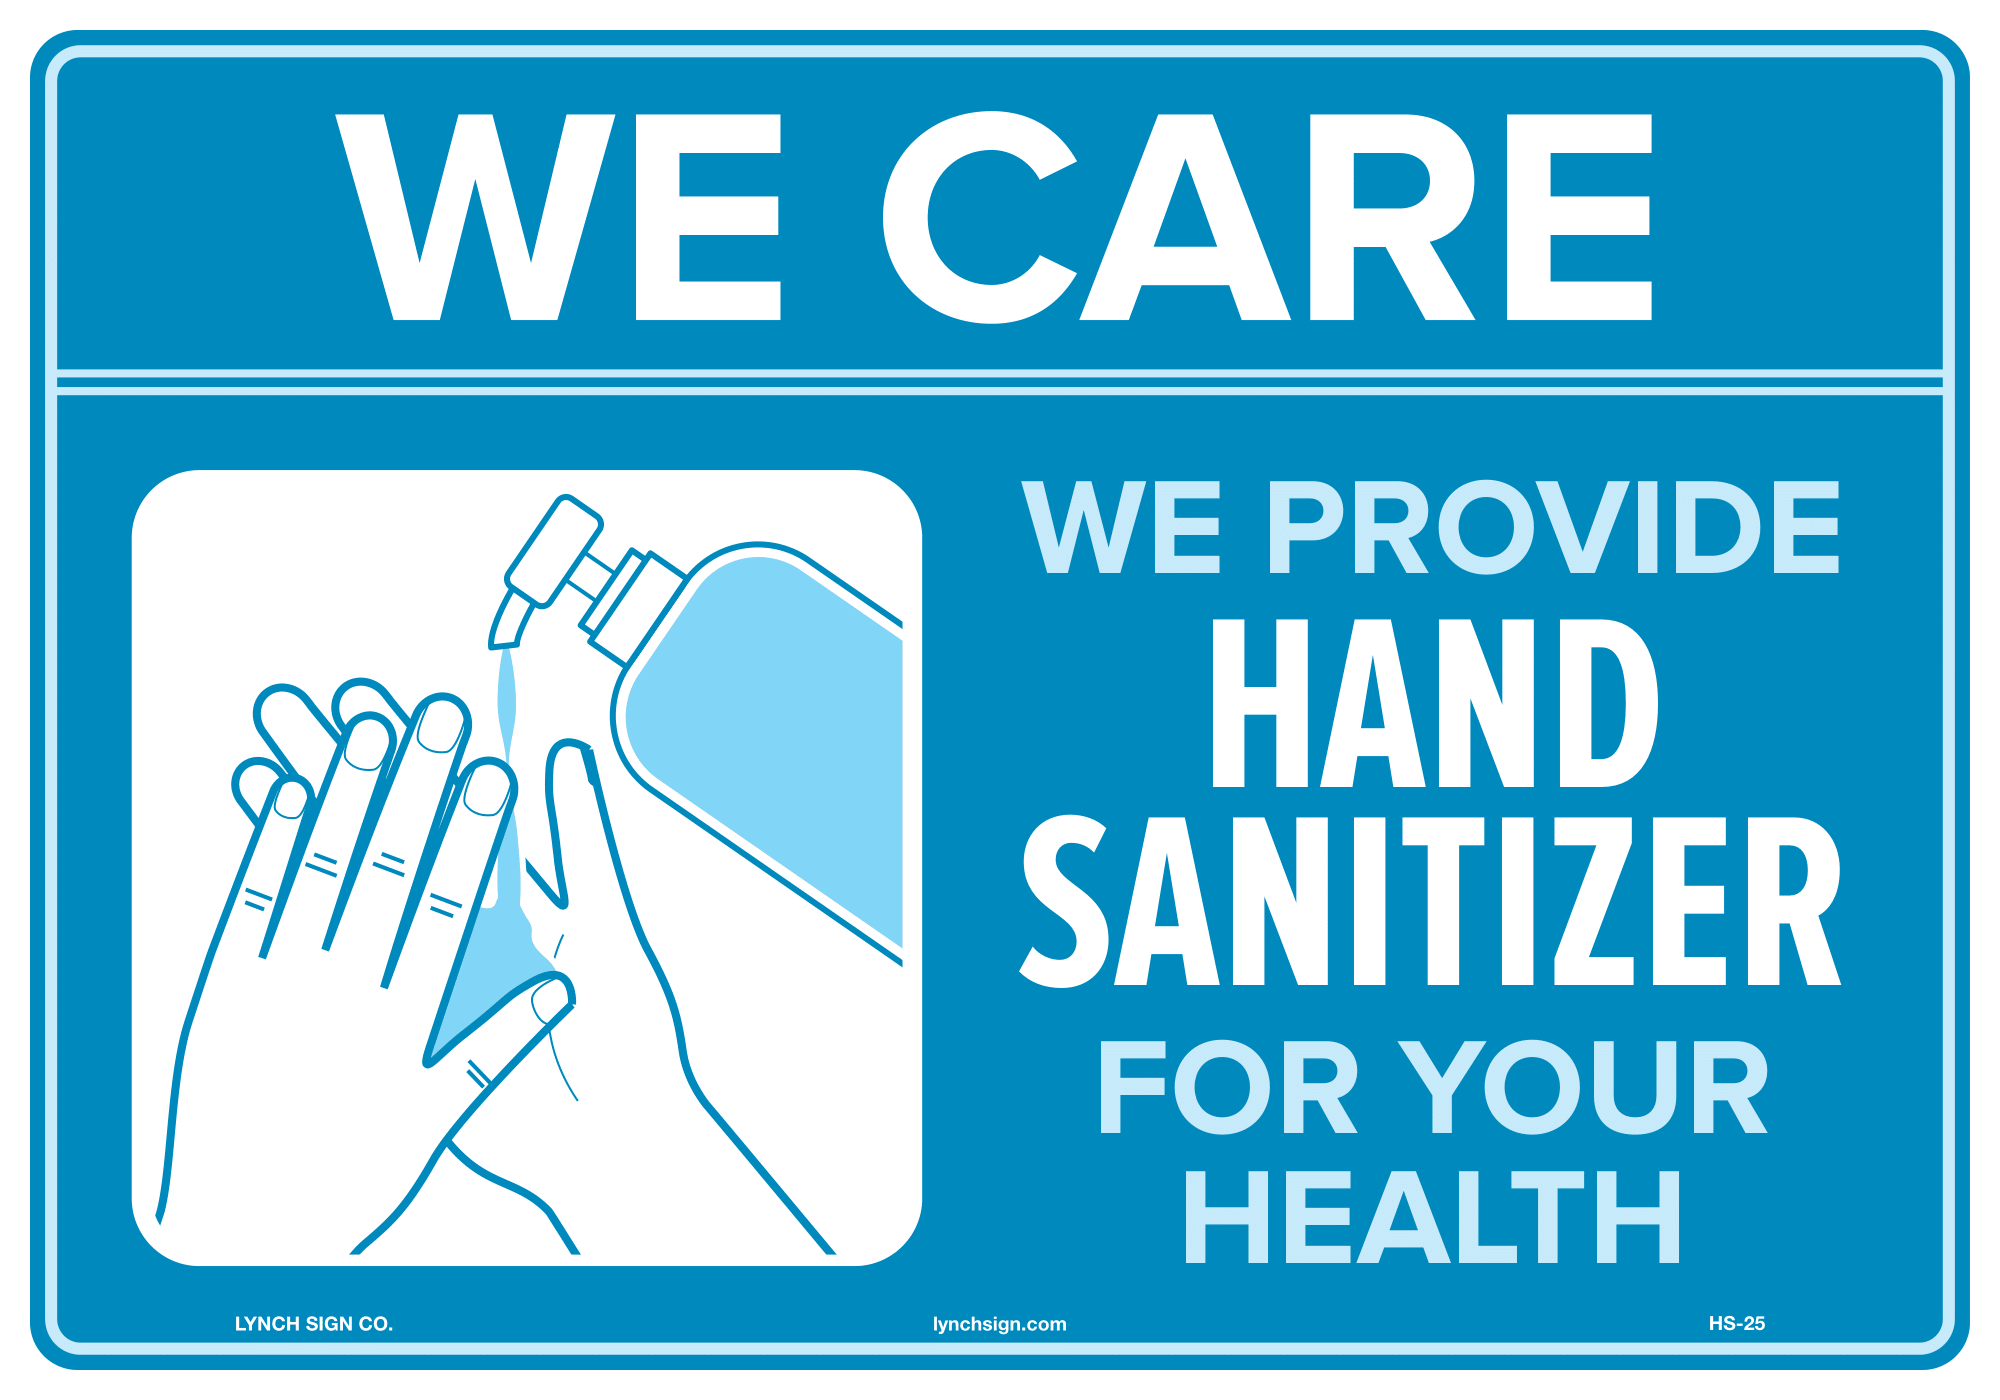 Lynch HS-25 We Care, We Provide Hand Sanitizer For Your Health, 10" x 7"